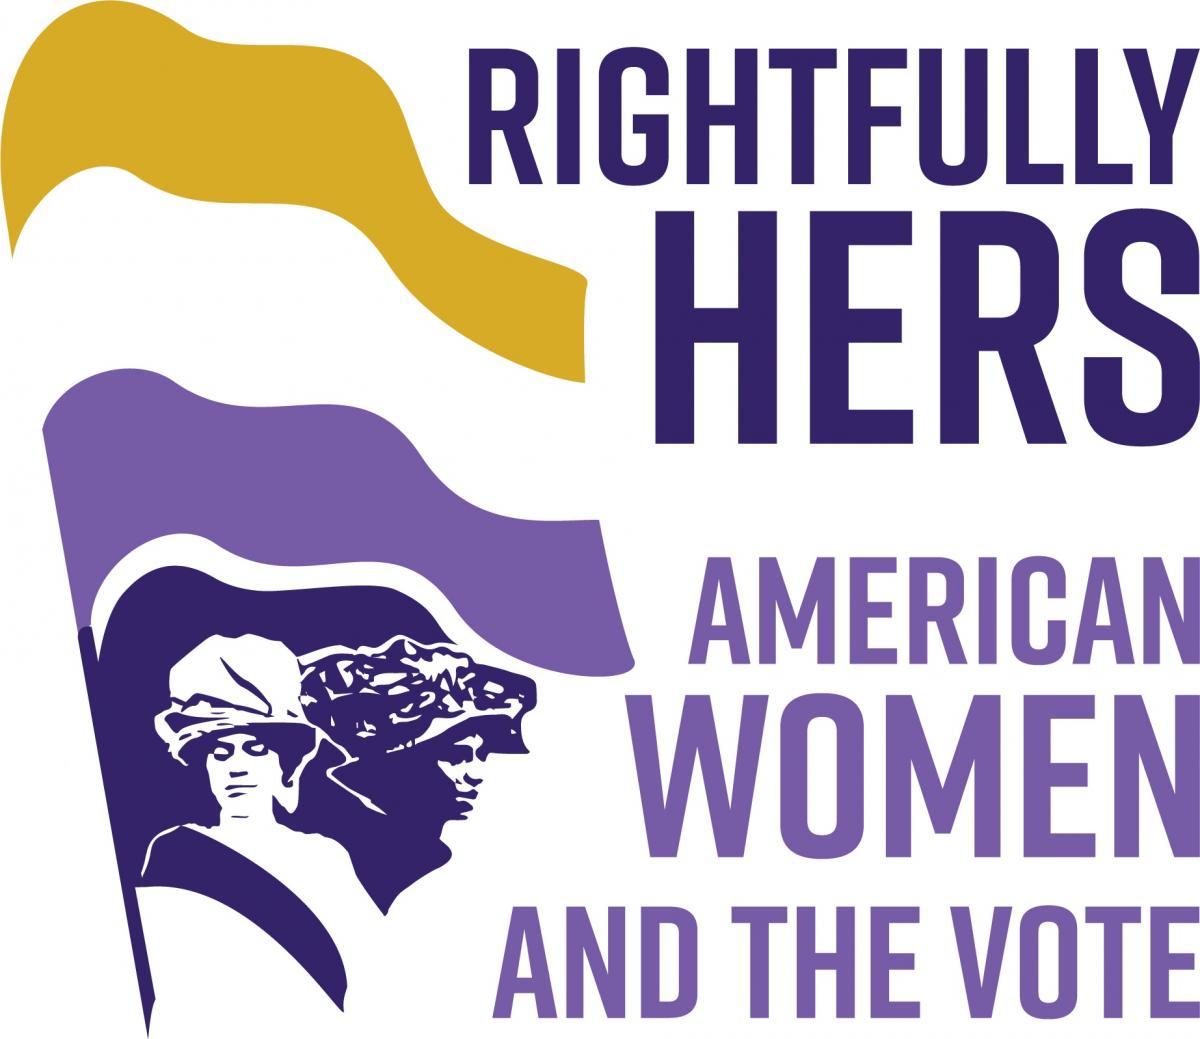 Rightfully Hers: American Women and the Vote